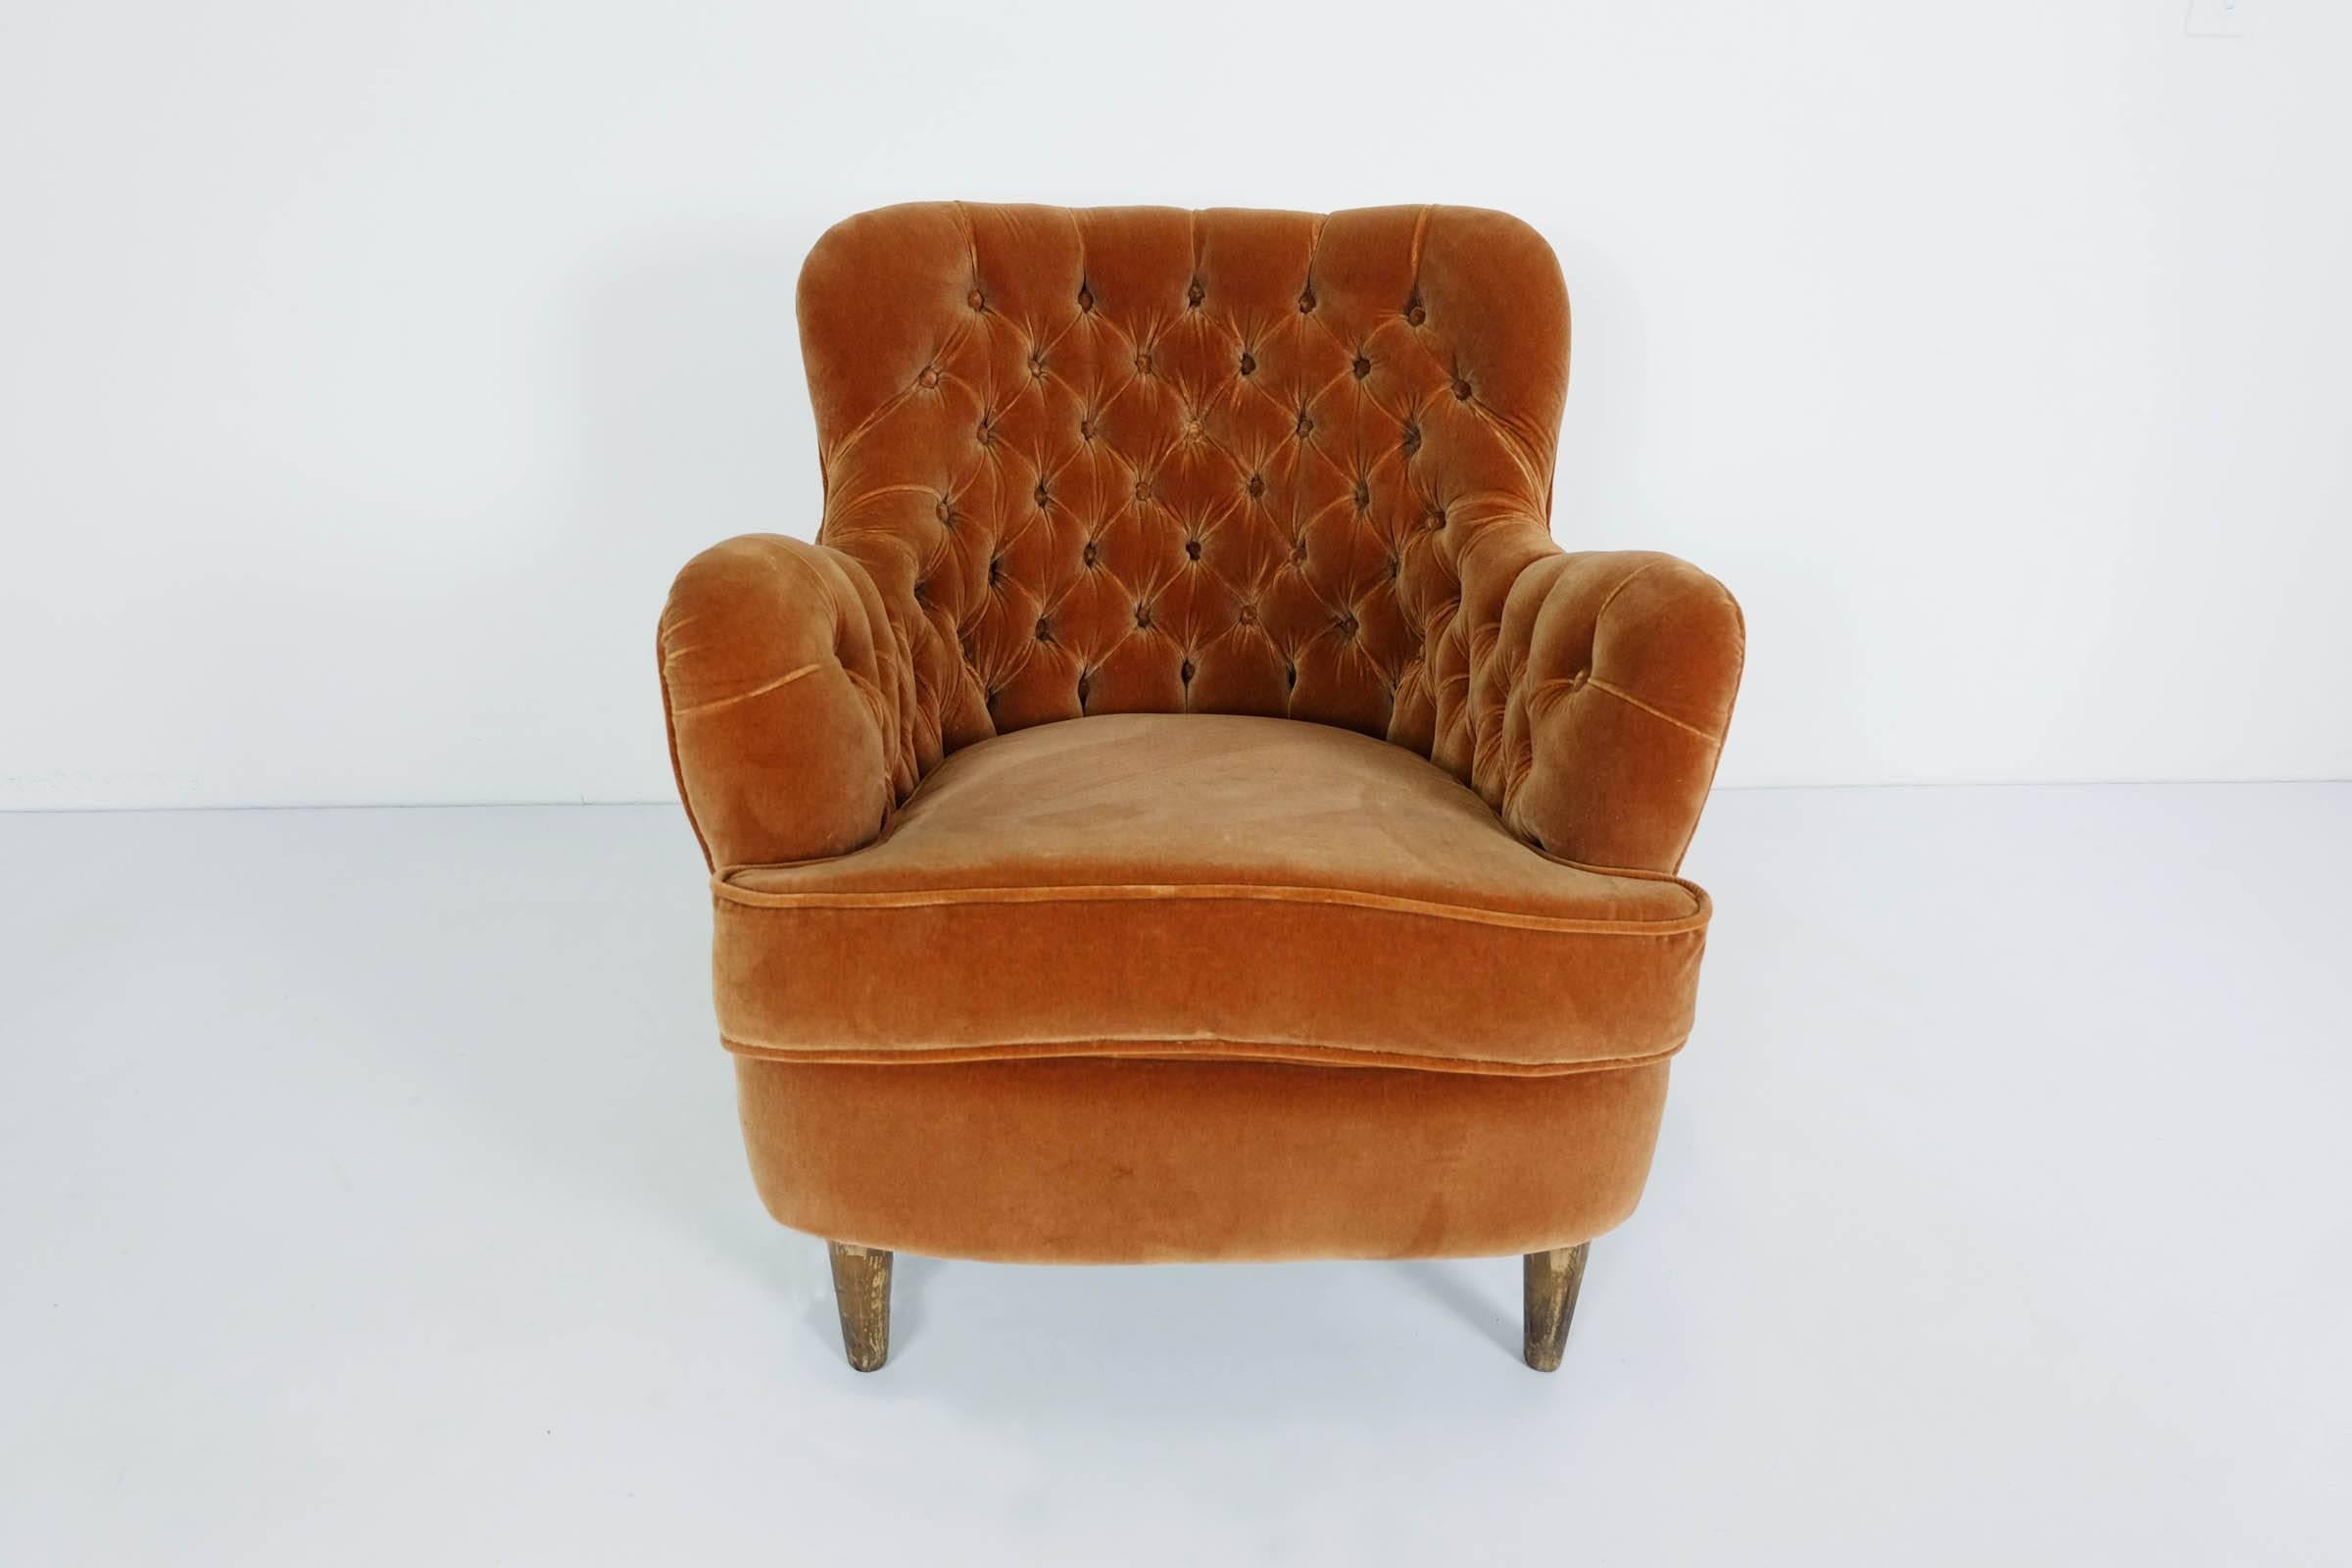 Totally new upholstery in velvet light tobacco color, cushion with original structure, wood.